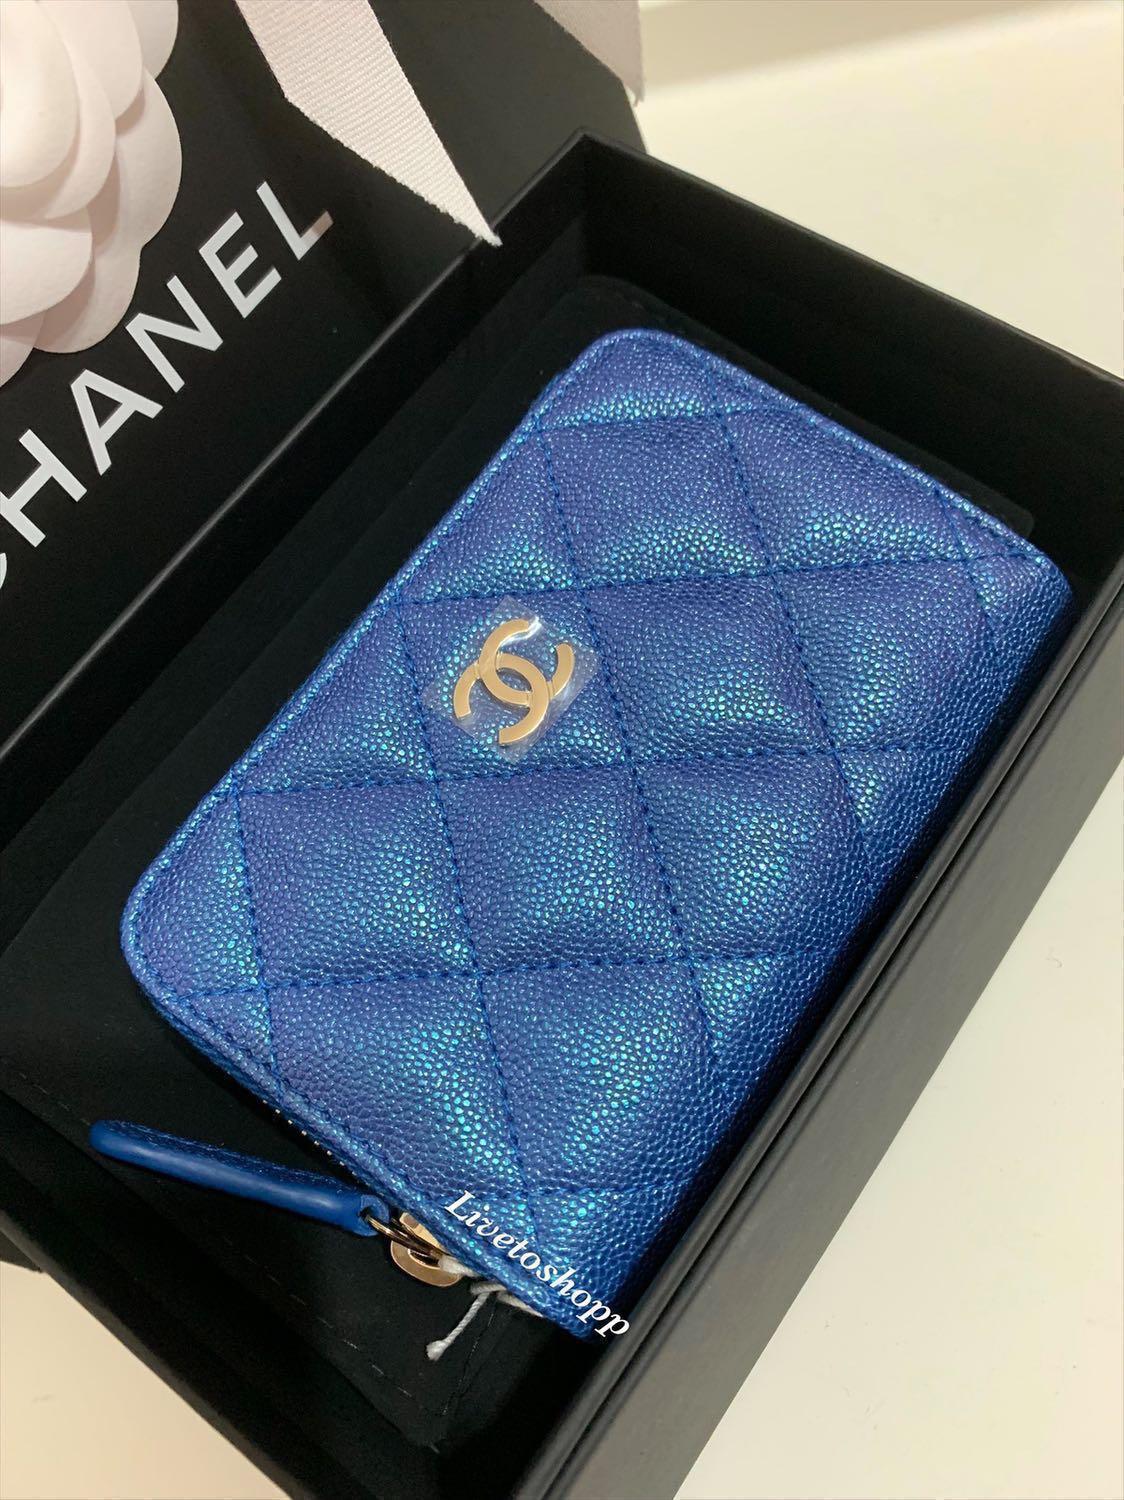 The Global Luxury Closet - Chanel 19S iridescent pink Zippy coin purse with  ghw Price 💰: $(US Dollars) $695 Price does NOT include Paypal fee and  shipping fee. If you'd like to